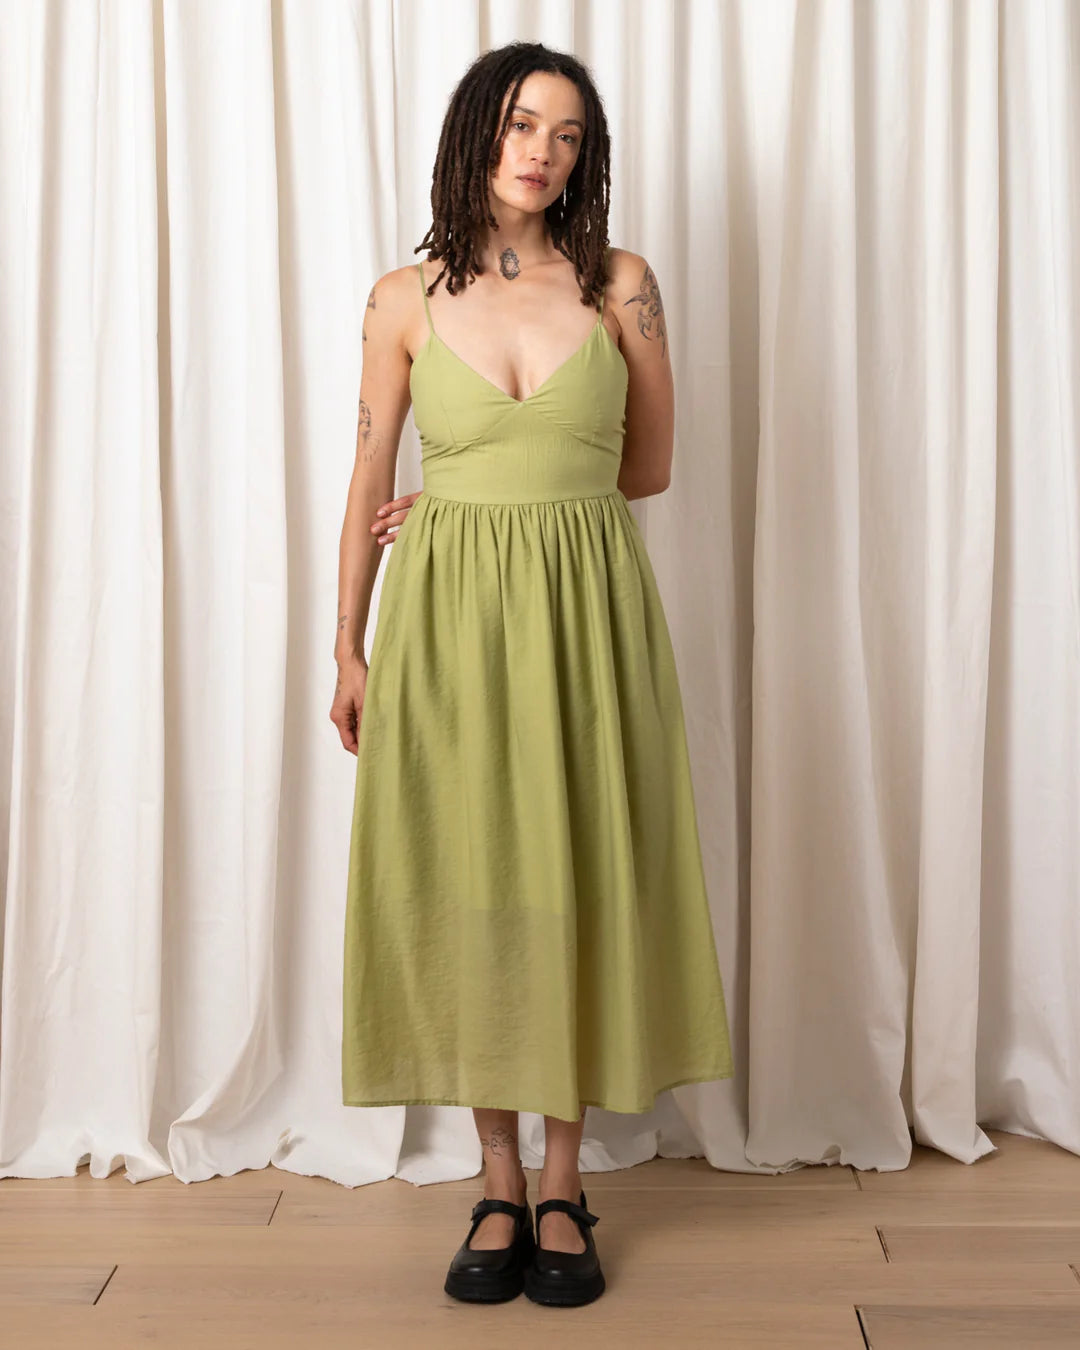 Tie Back Midi Dress - Muted Lime